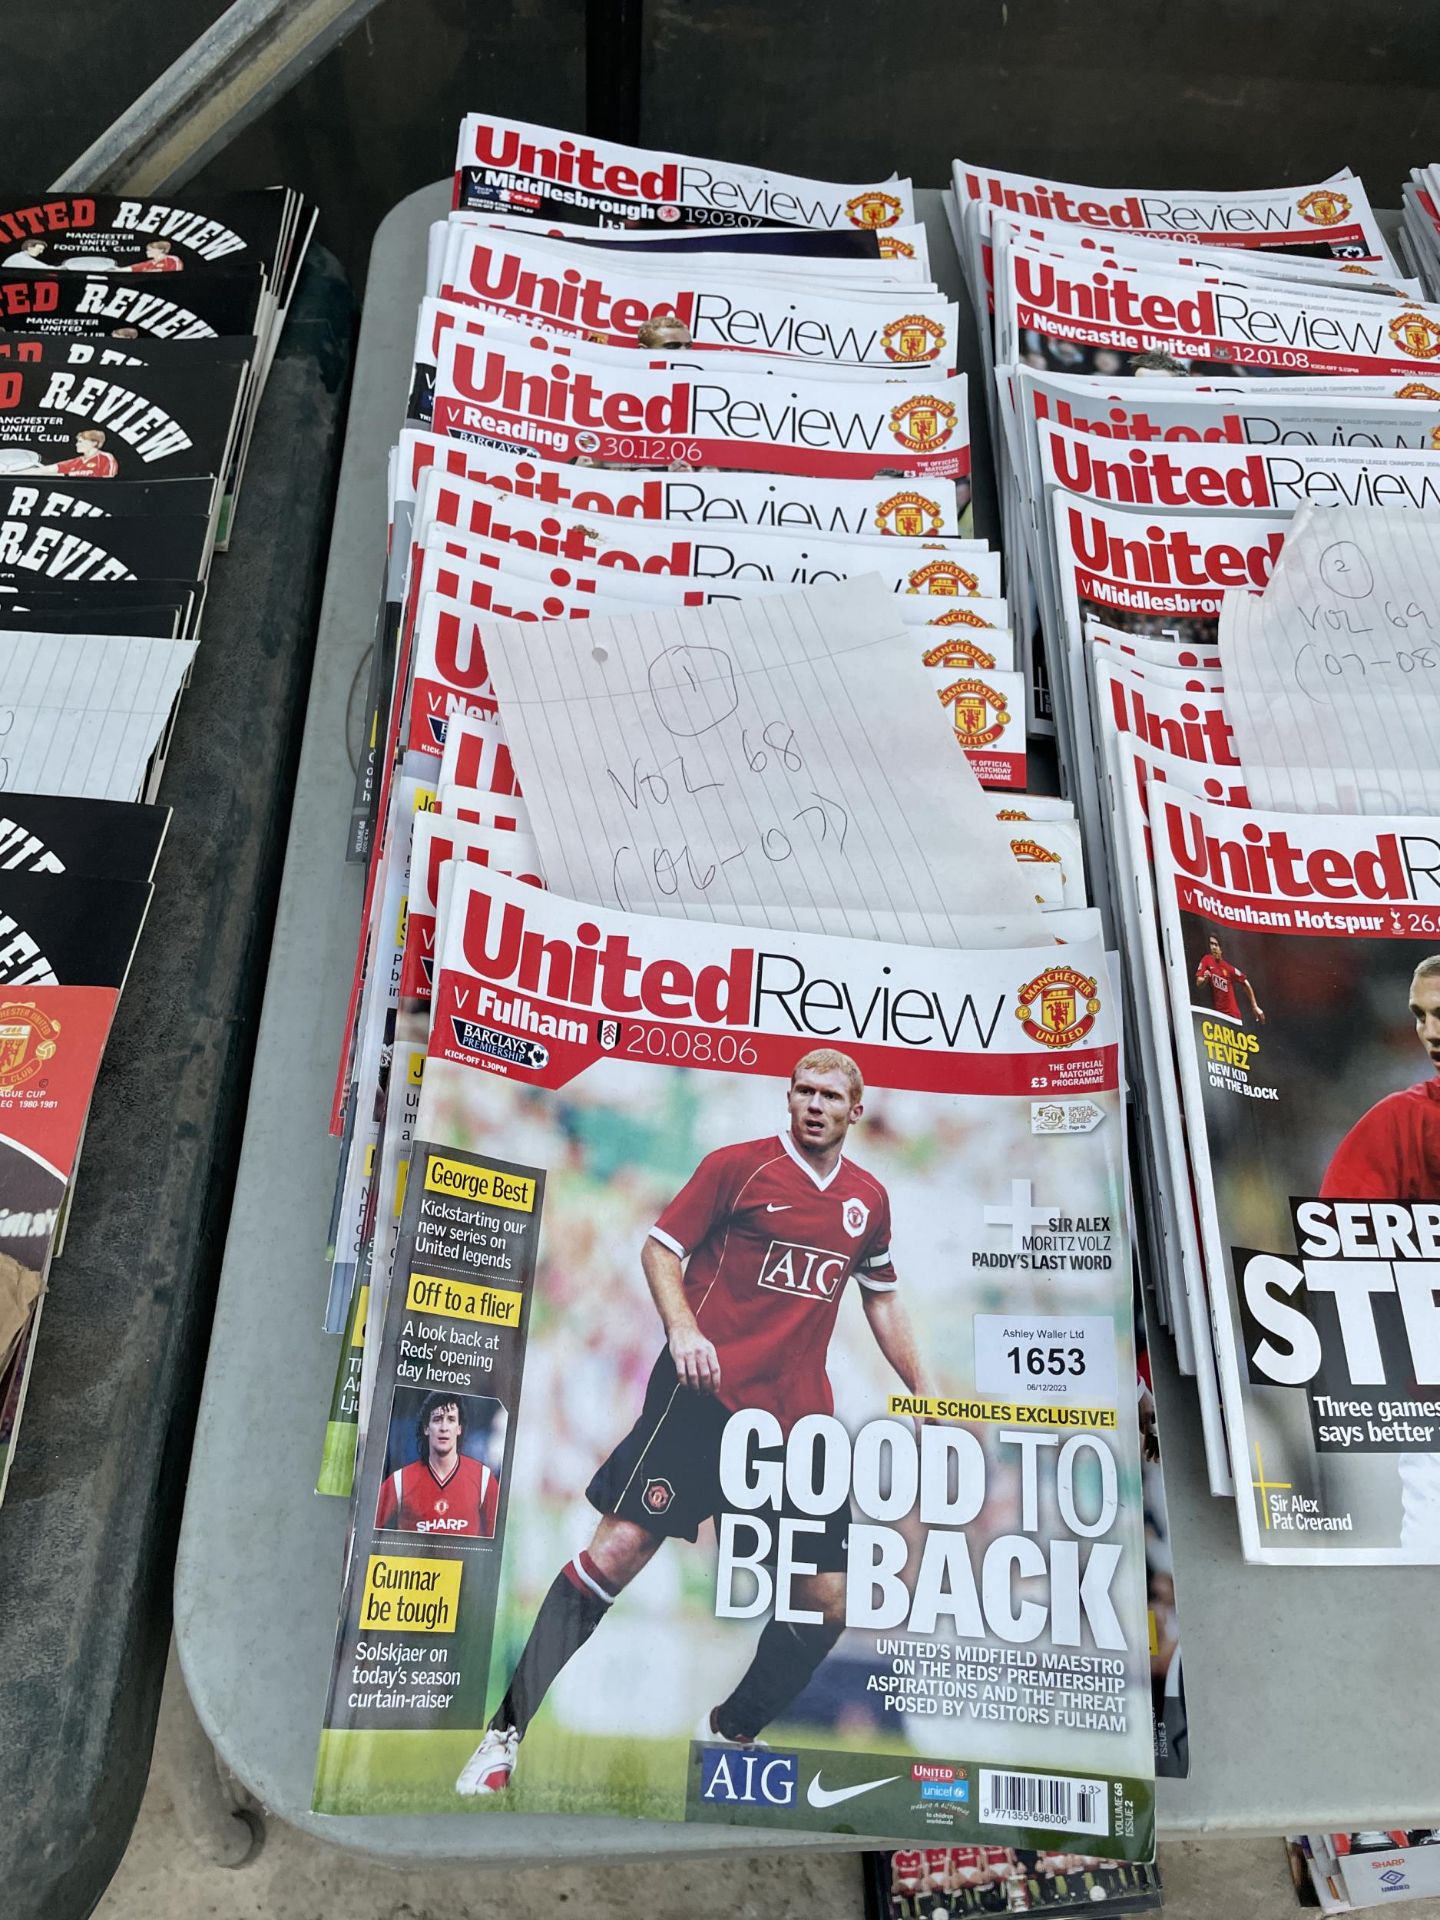 A BELIEVED COMPLETE SET OF MANCHESTER UNITED PROGRAMMES FROM THE 2006-2007 SEASON